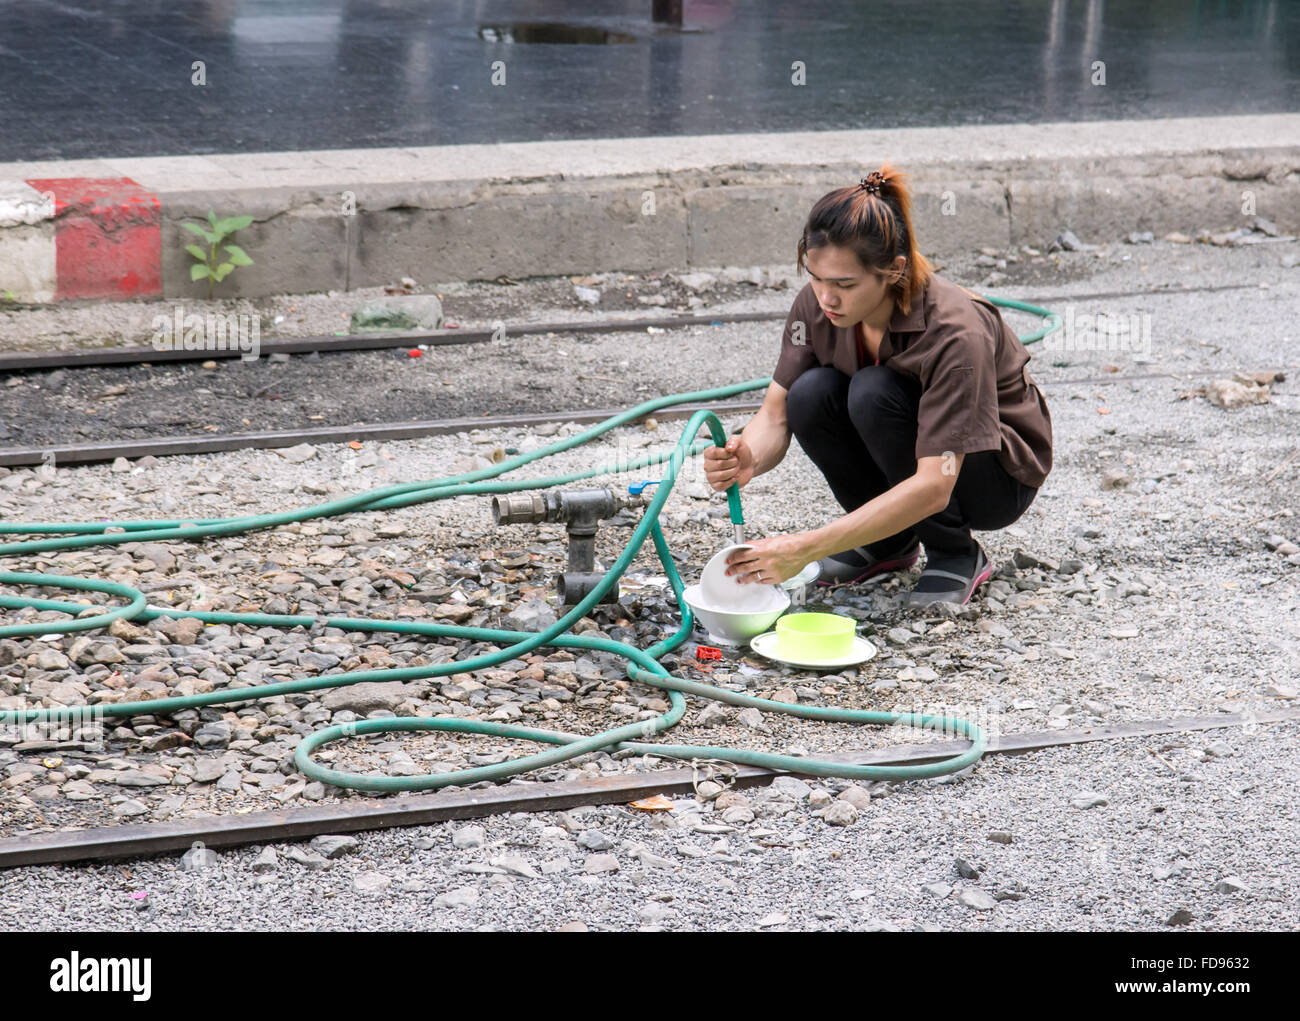 woman washes dishes between the tracks at the station Stock Photo